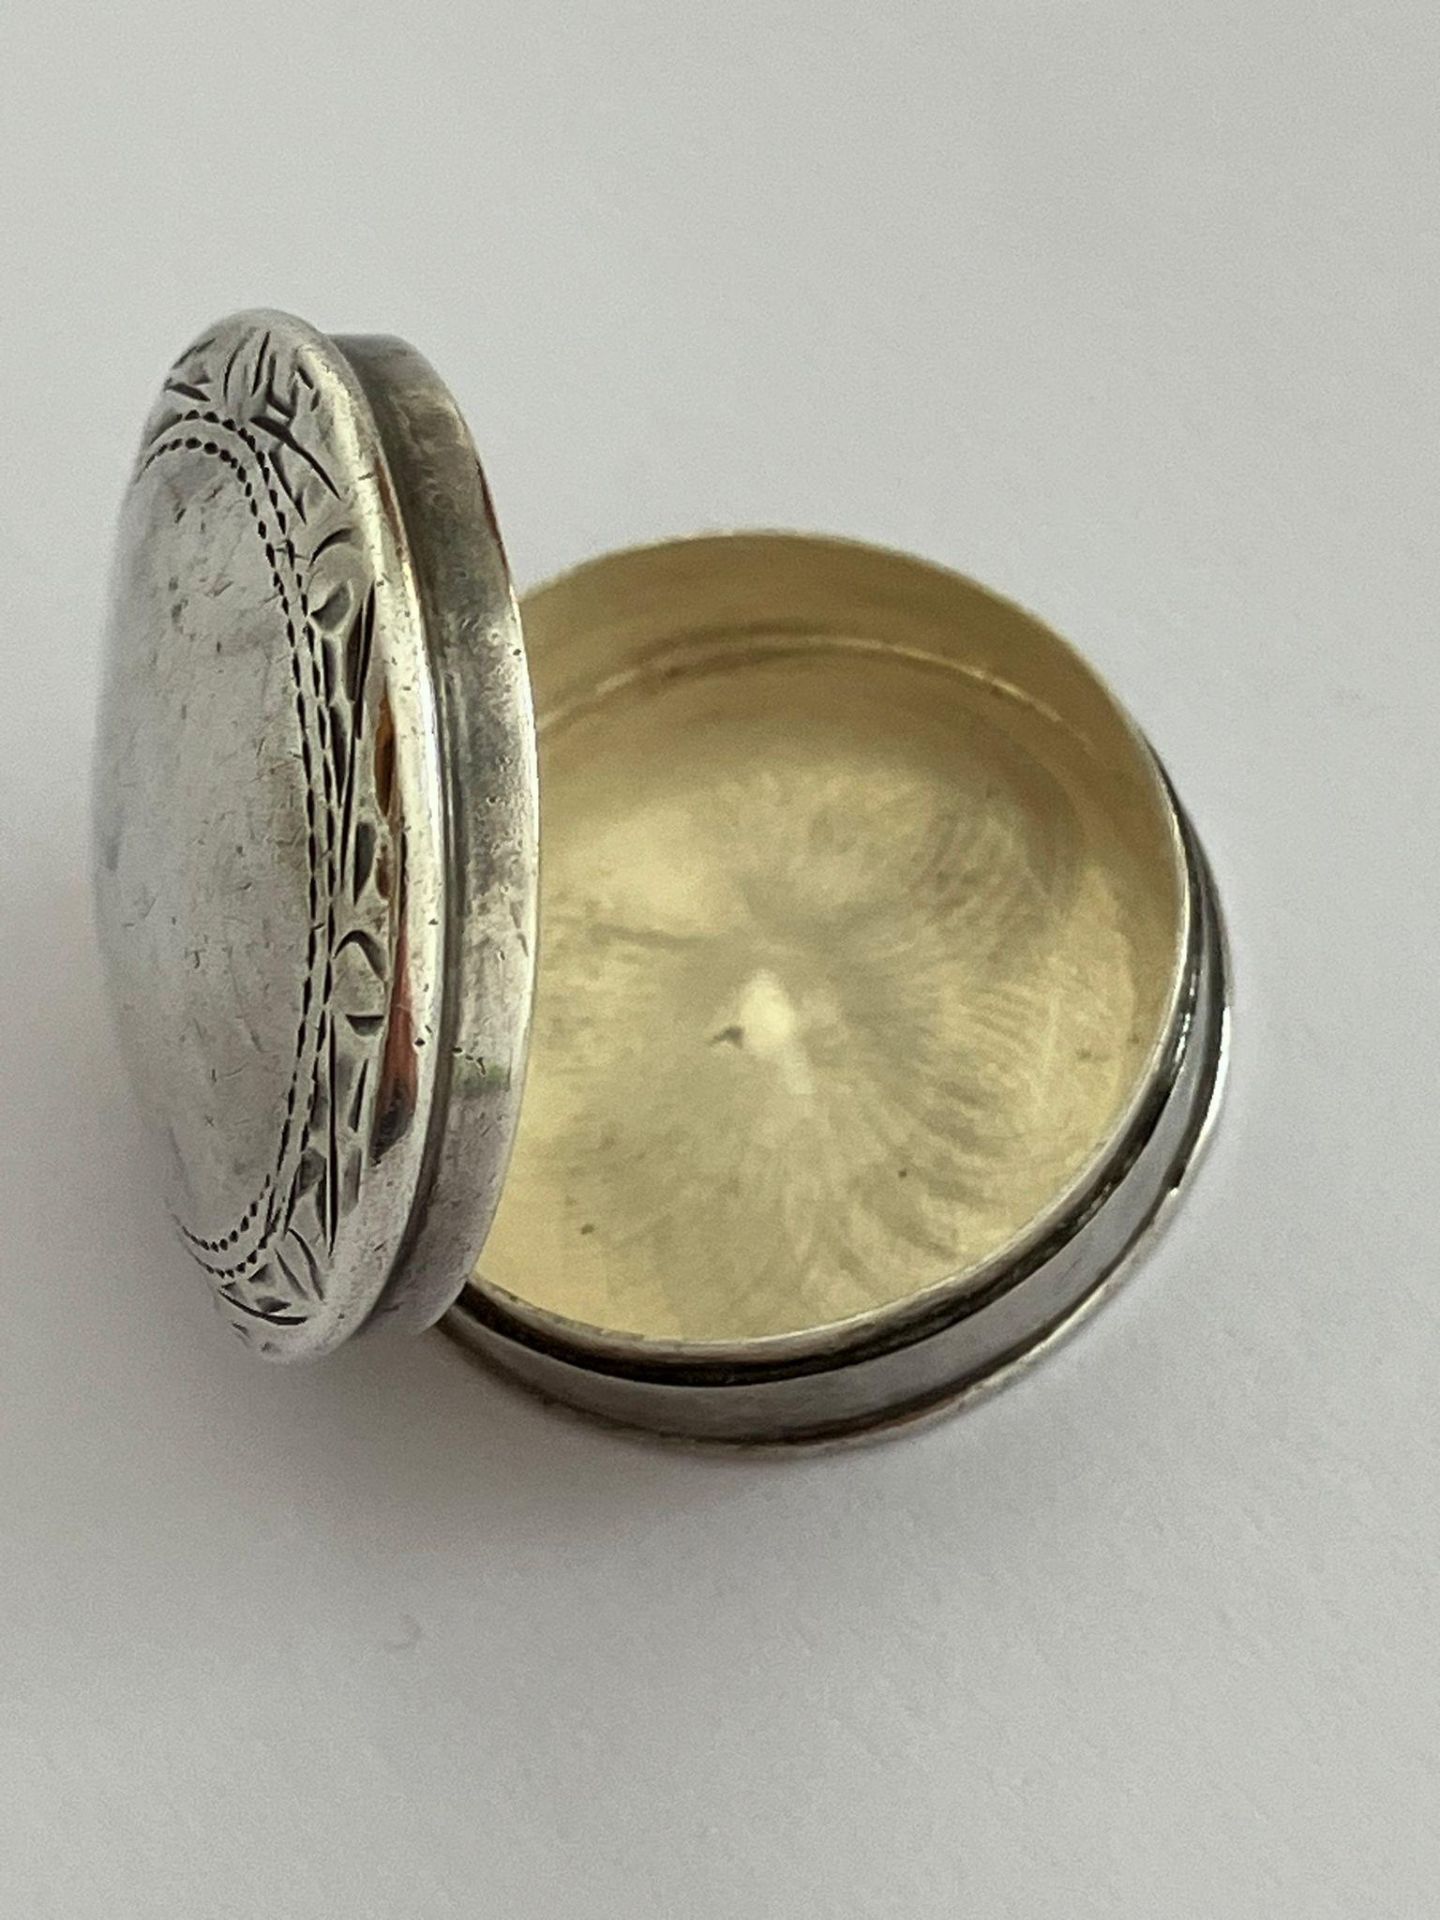 Vintage SILVER PILL BOX in circular form with decorated border. Hallmark on base. - Image 2 of 2